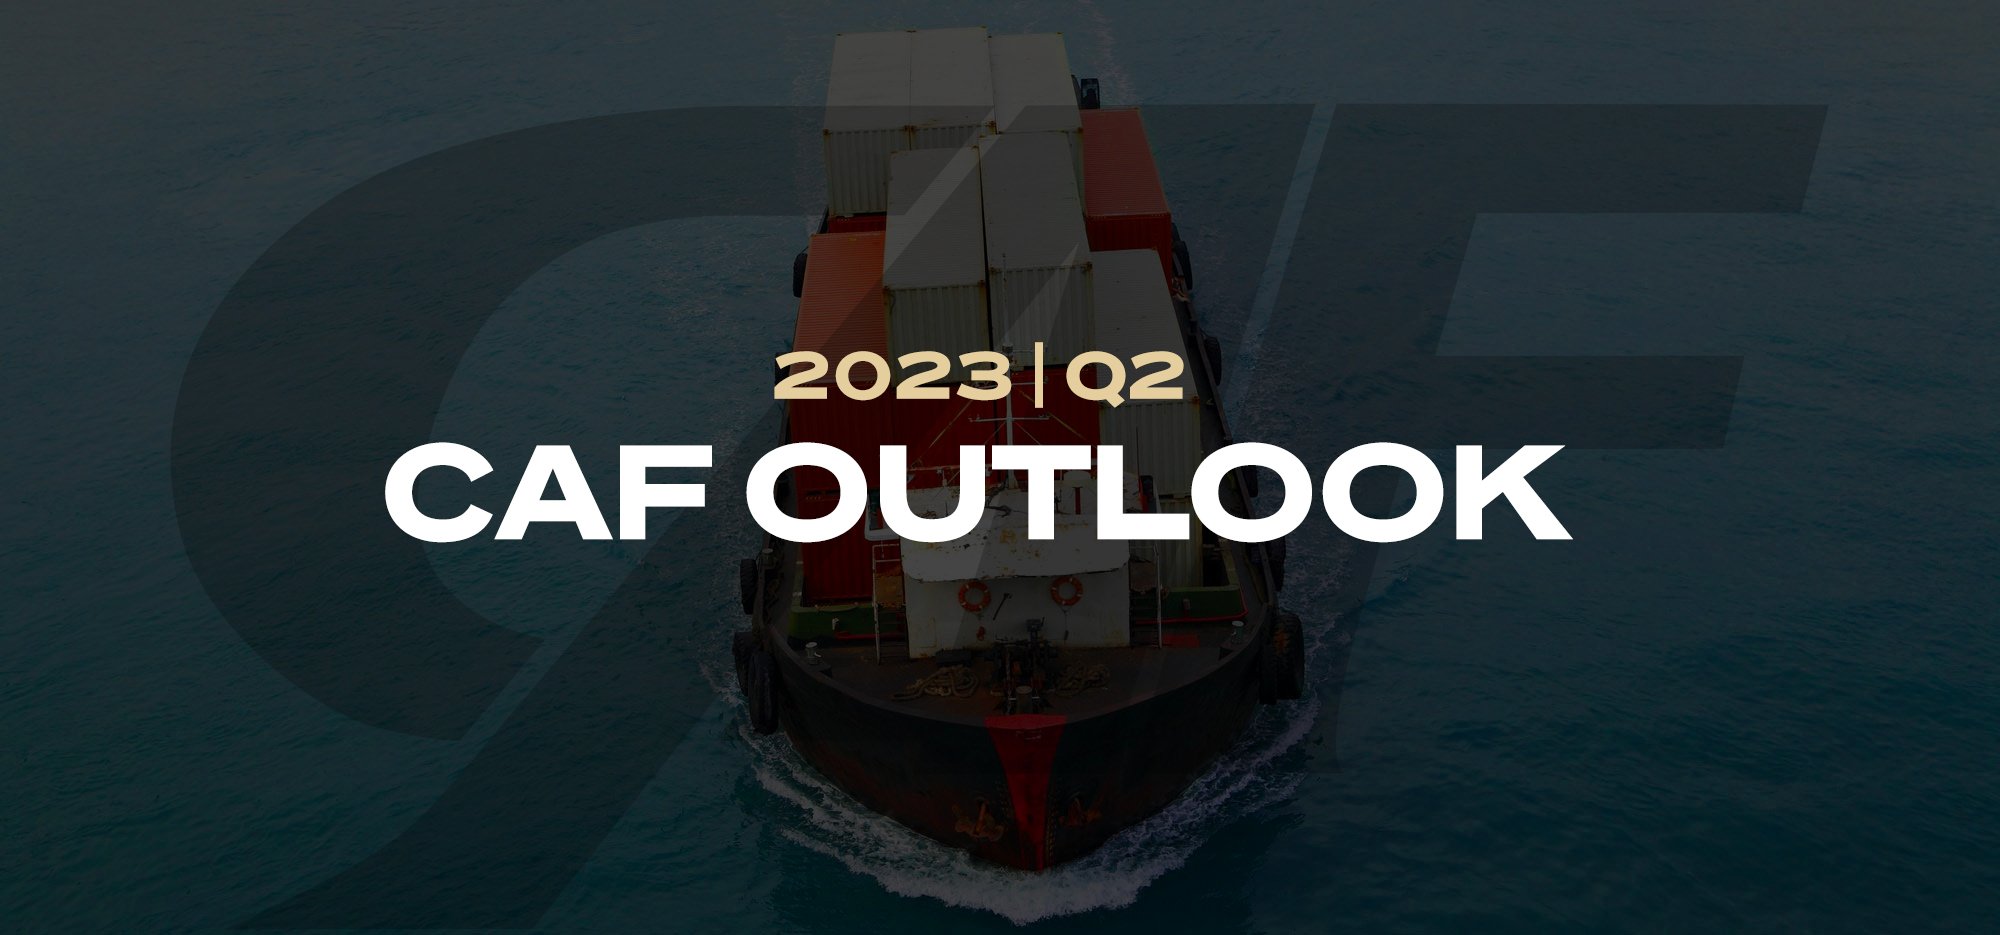 Freight Ship with text - 2023 Q2 CAF Outlook